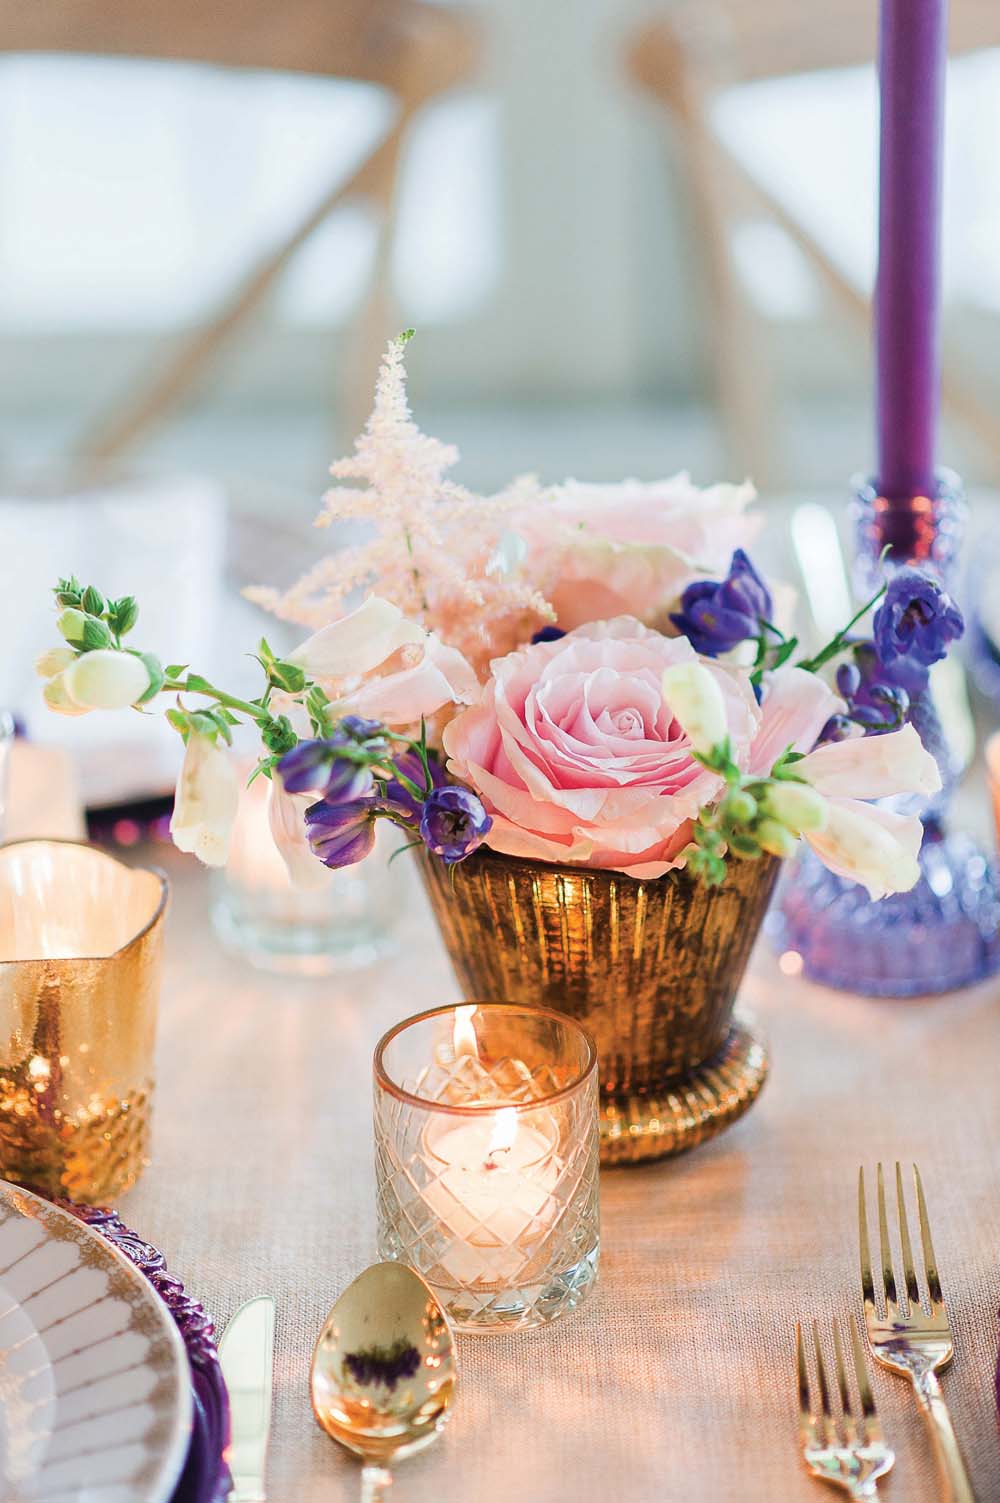 An Ultra Violet-Inspired Styled Shoot In Quebec - Tablescape